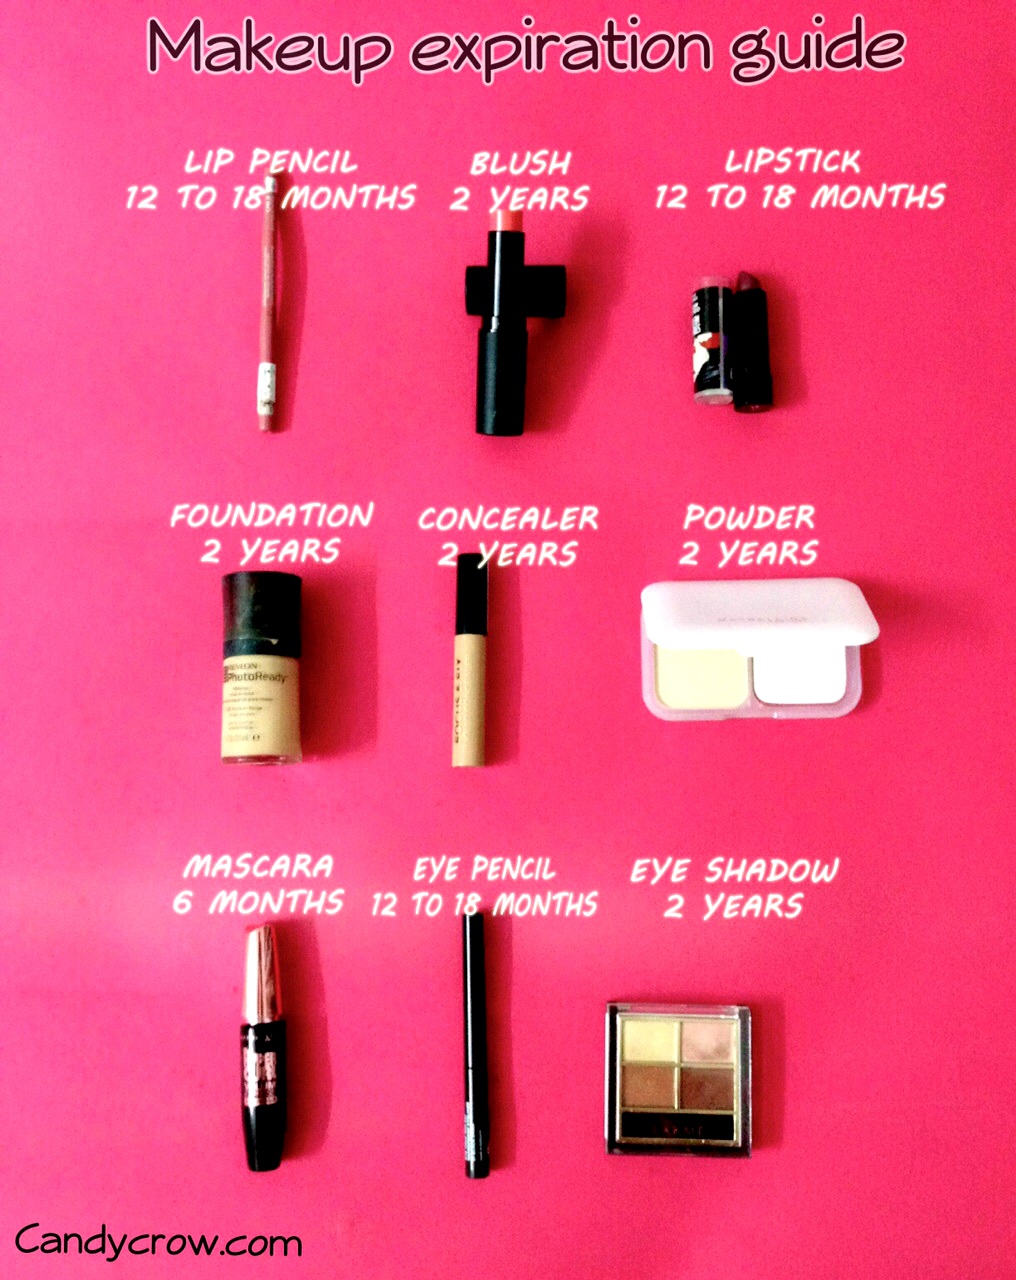 When to Toss Away Your makeup products, expiration guide for makeup products